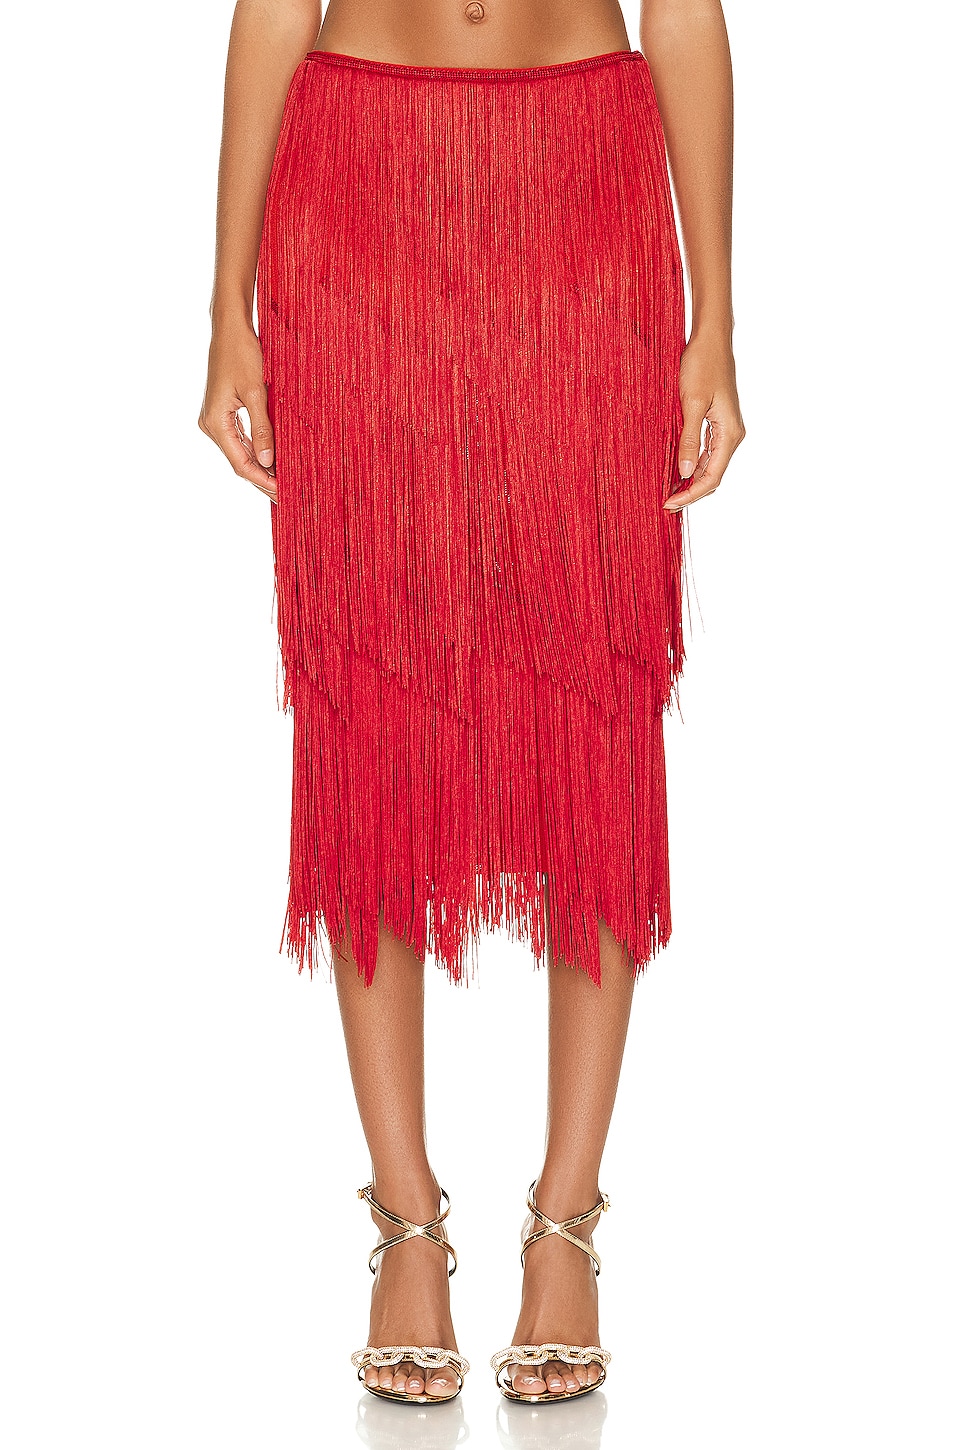 Image 1 of TOM FORD Fringe Pencil Skirt in Candy Red